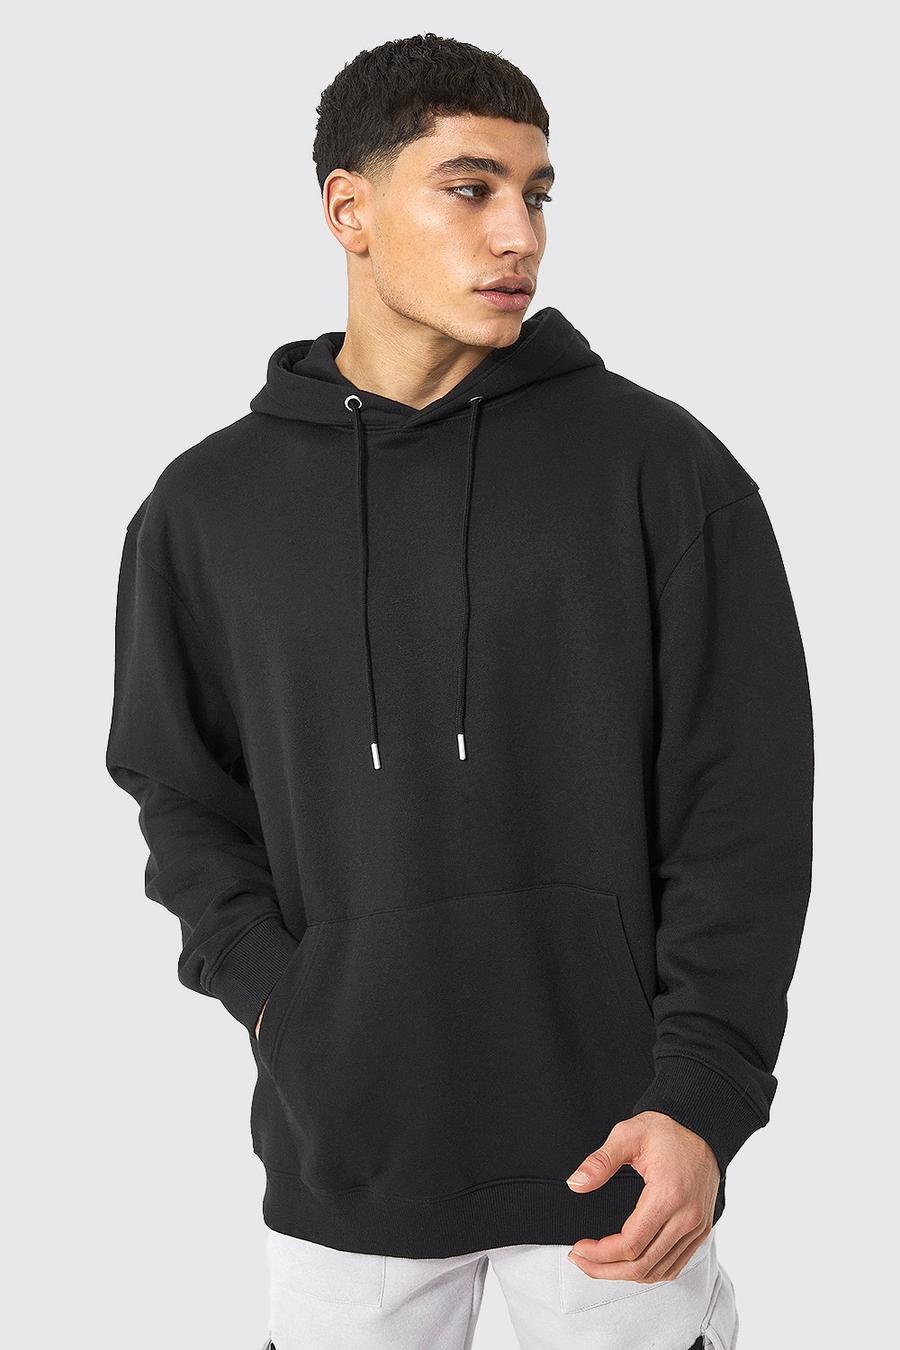 boohooMAN Oversized Over The Head Hoodie - Black - Size XS